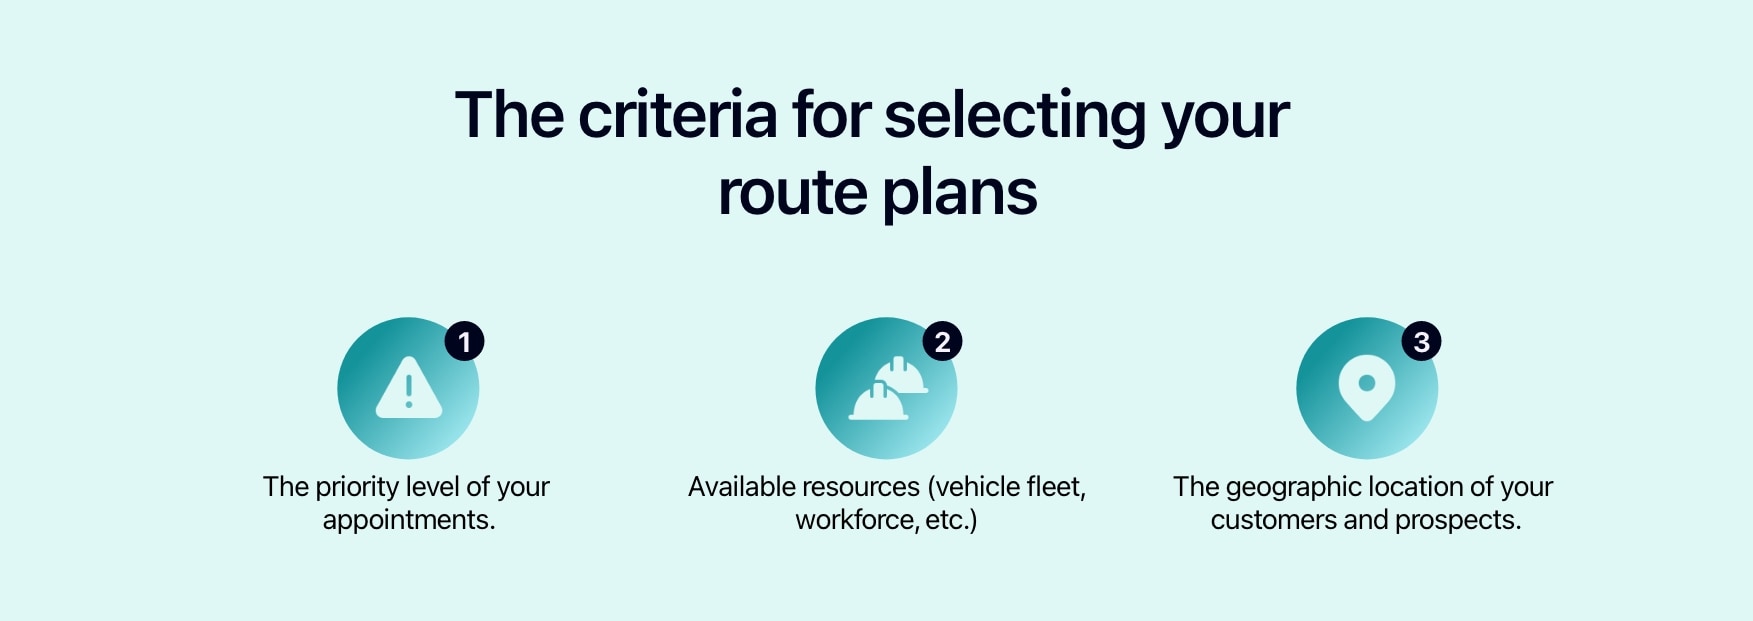 Diagram showing the criteria for selecting your route plans.